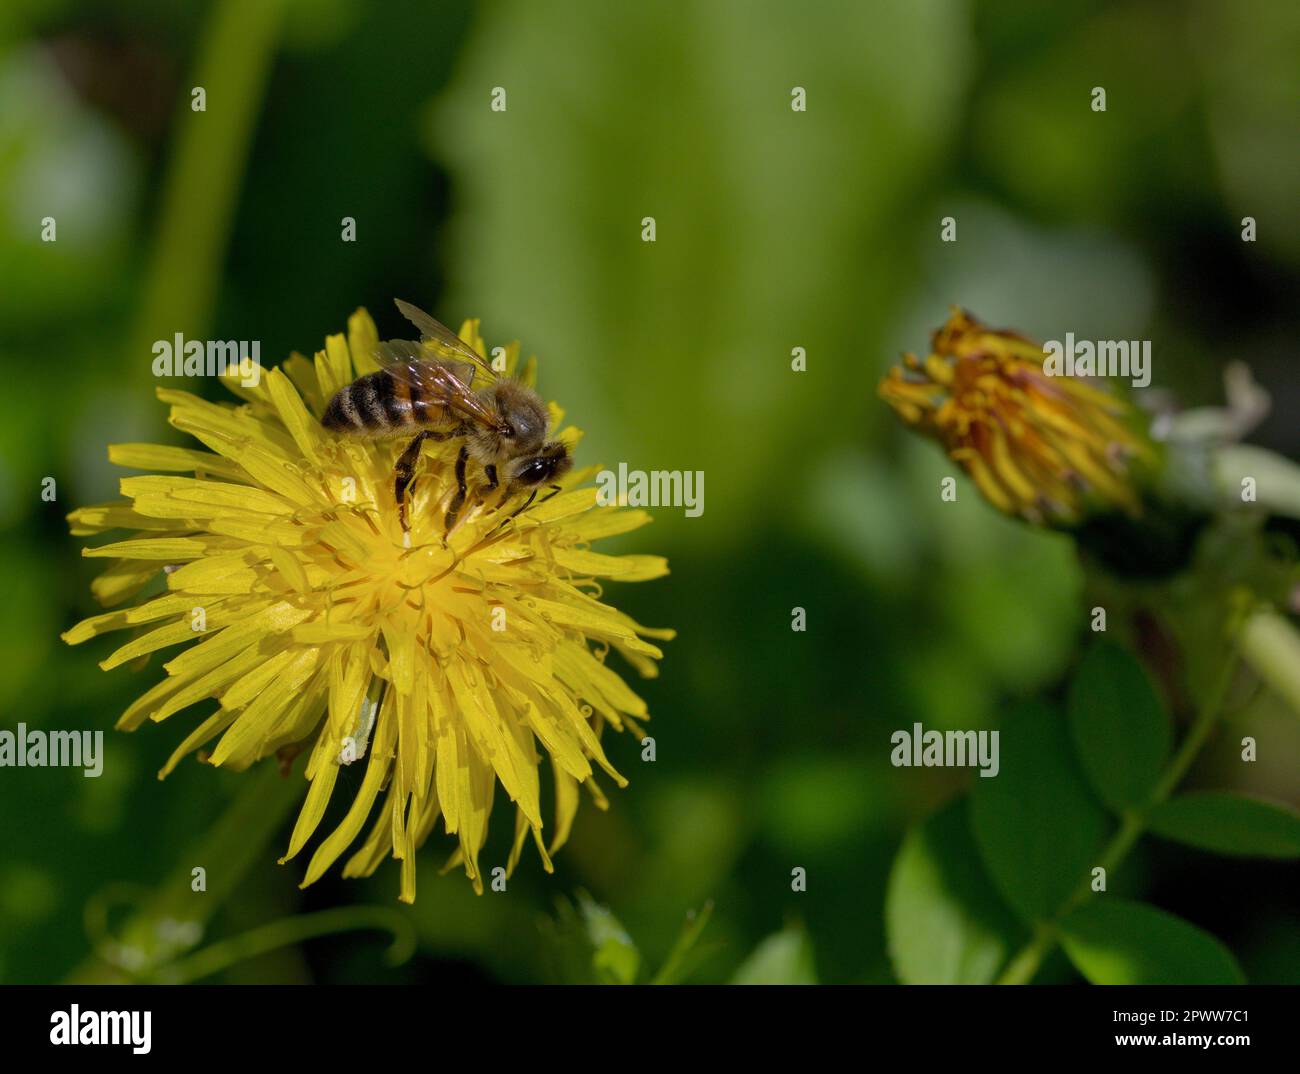 Macro photography of a honey bee on a flower Stock Photo